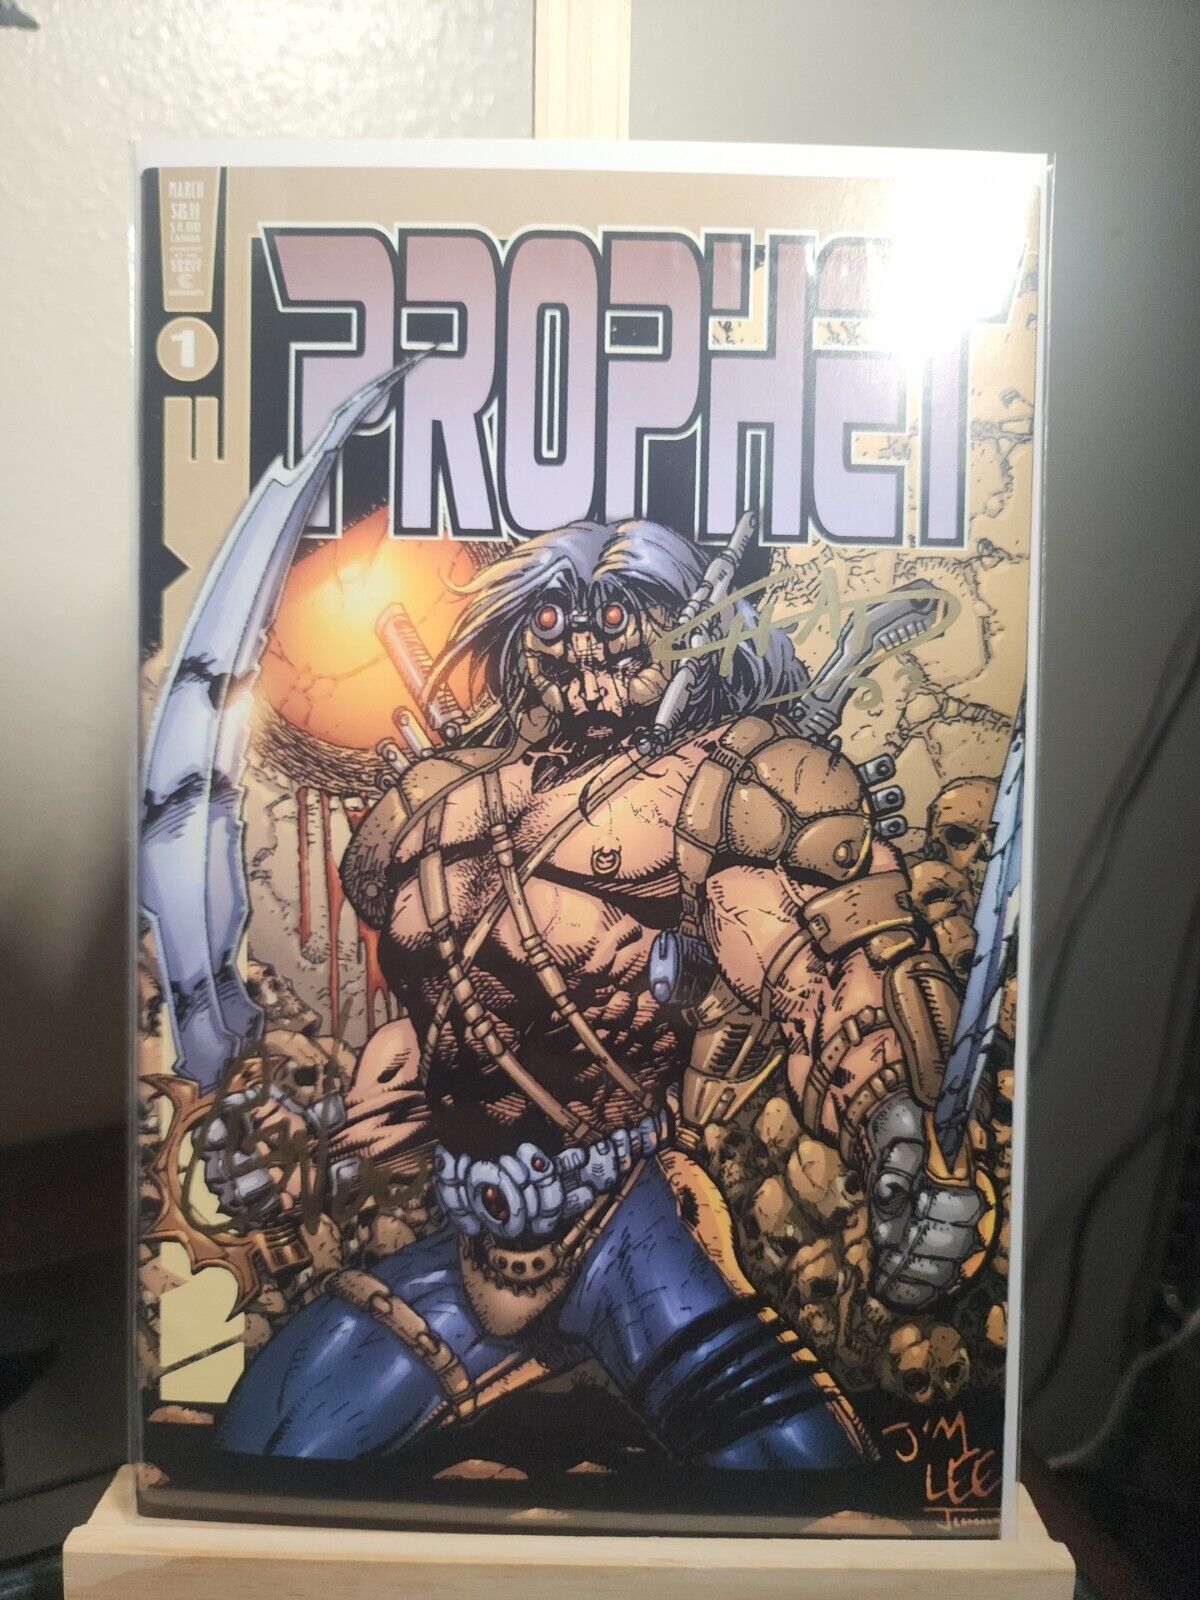 Awesome Comics Prophet 1 Signed By Eric And Chad Walker. Jim Lee Limited Cover.